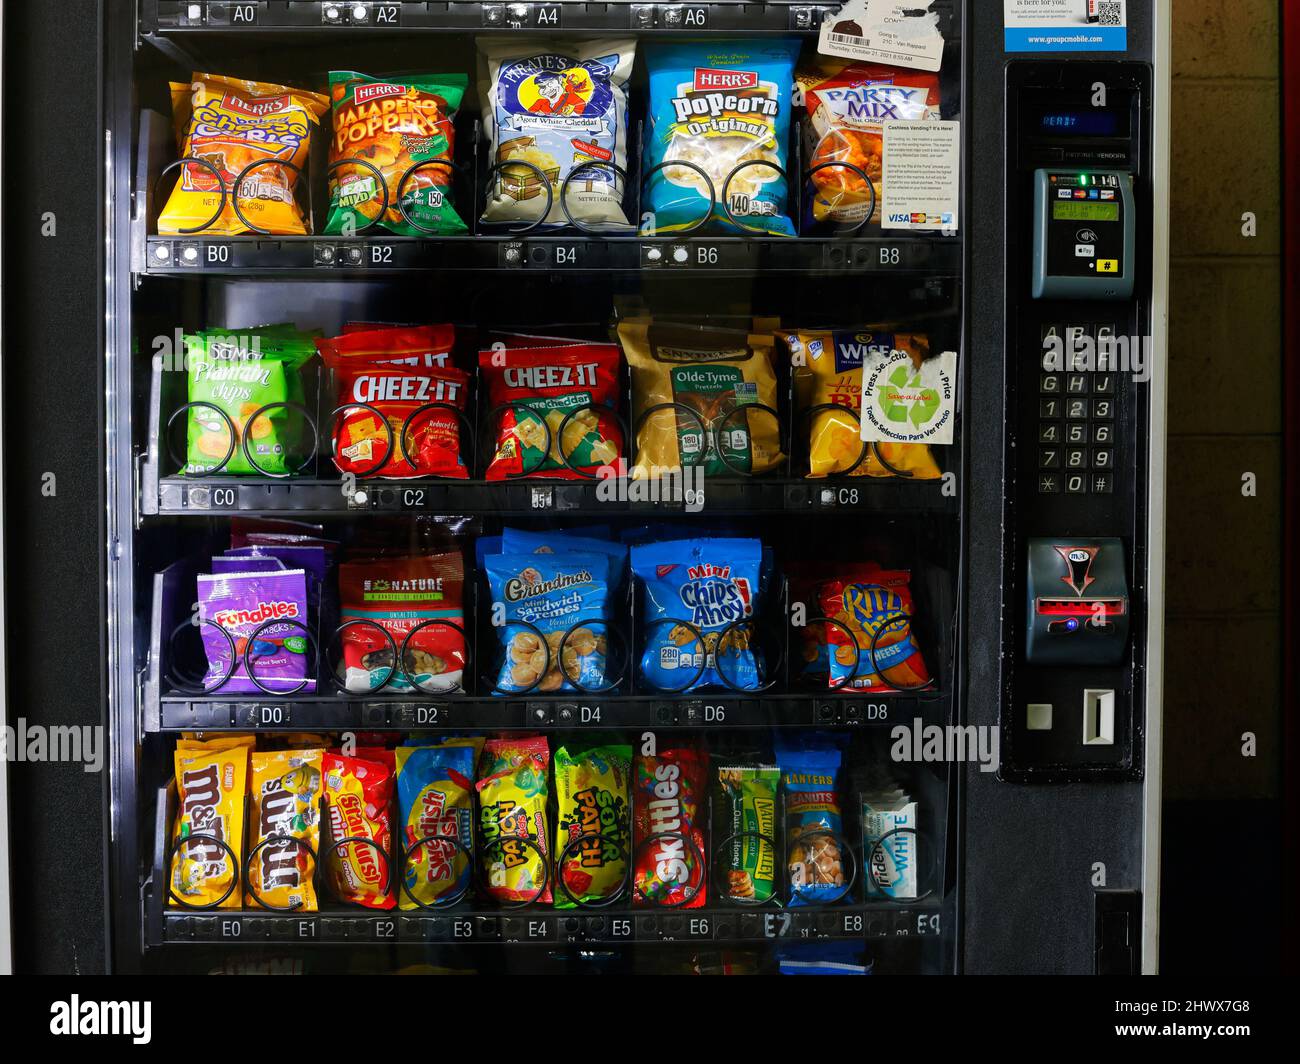 American snacks, chips, crisps, candy and other junk food in a vending machine with cashless, coin and card payment options. Stock Photo